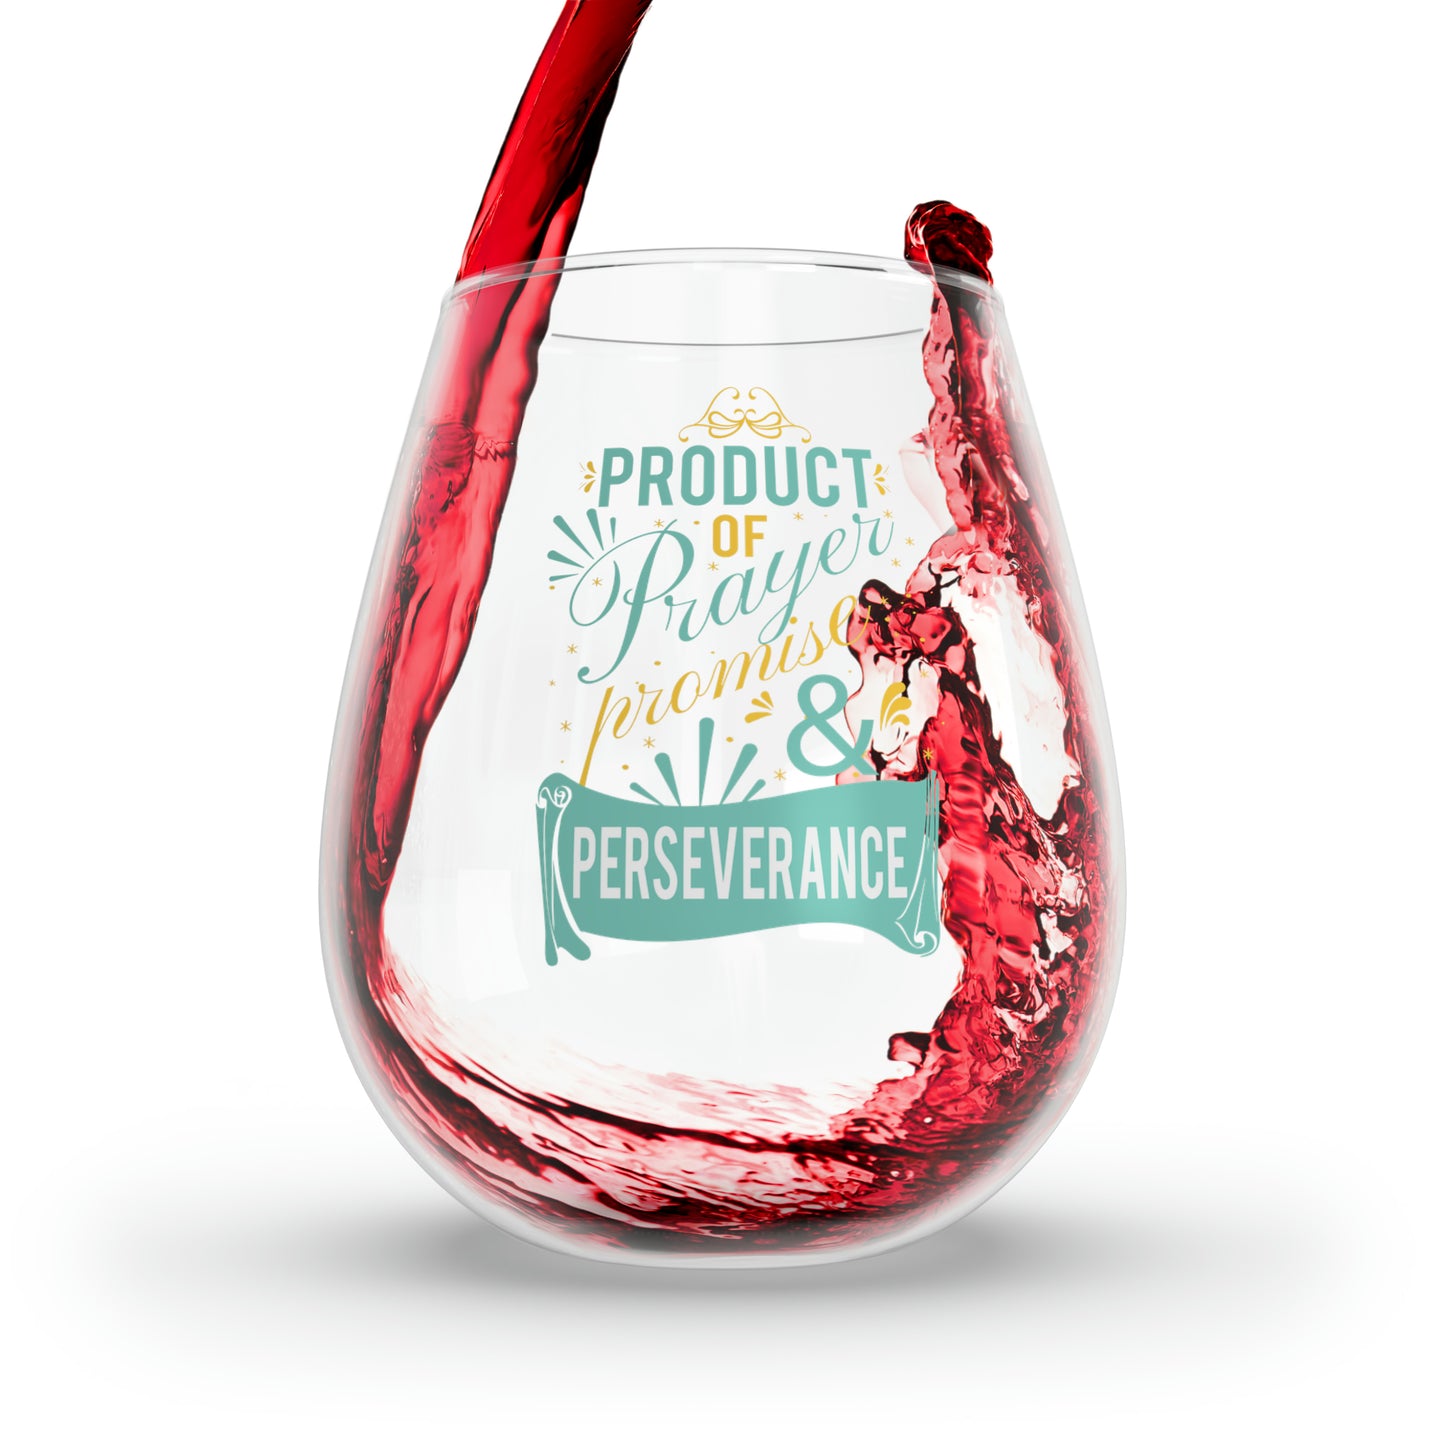 Product Of Prayer, Promise, & Perseverance Stemless Wine Glass, 11.75oz